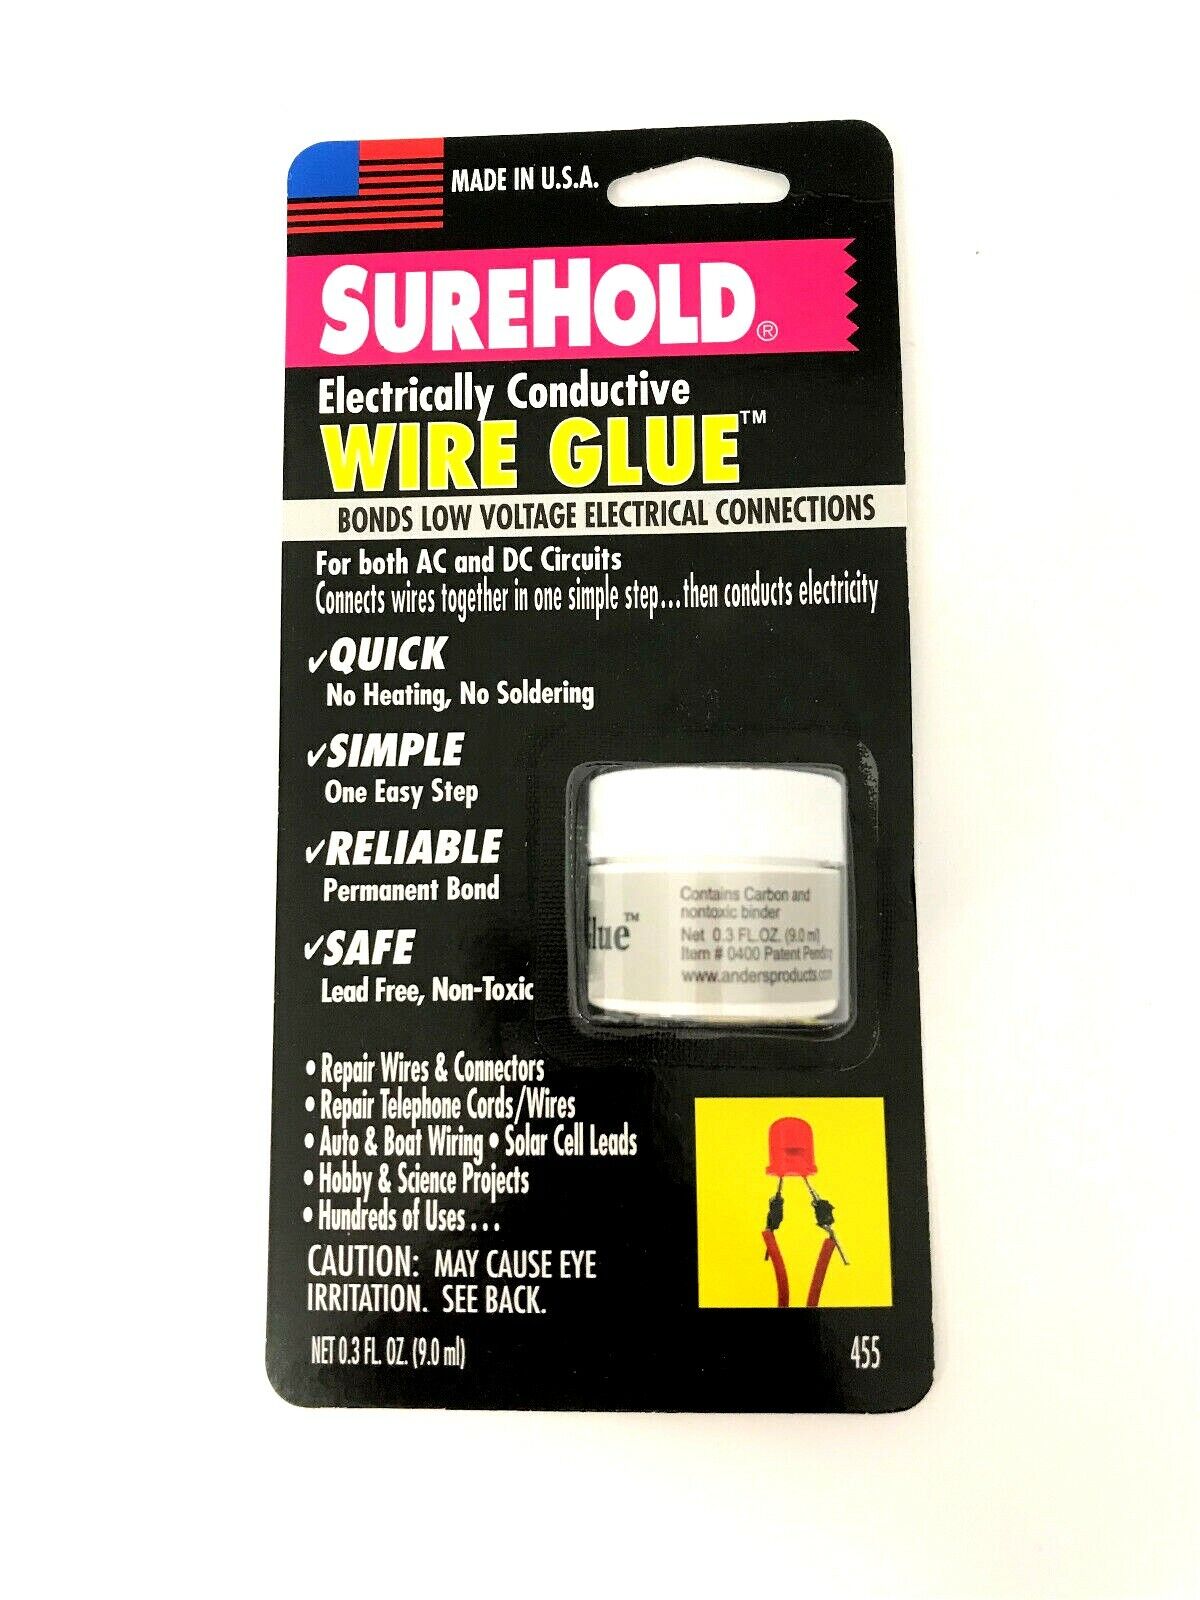 Surehold Electrically Conductive Wire Glue - Low Voltage Connections - SH-455